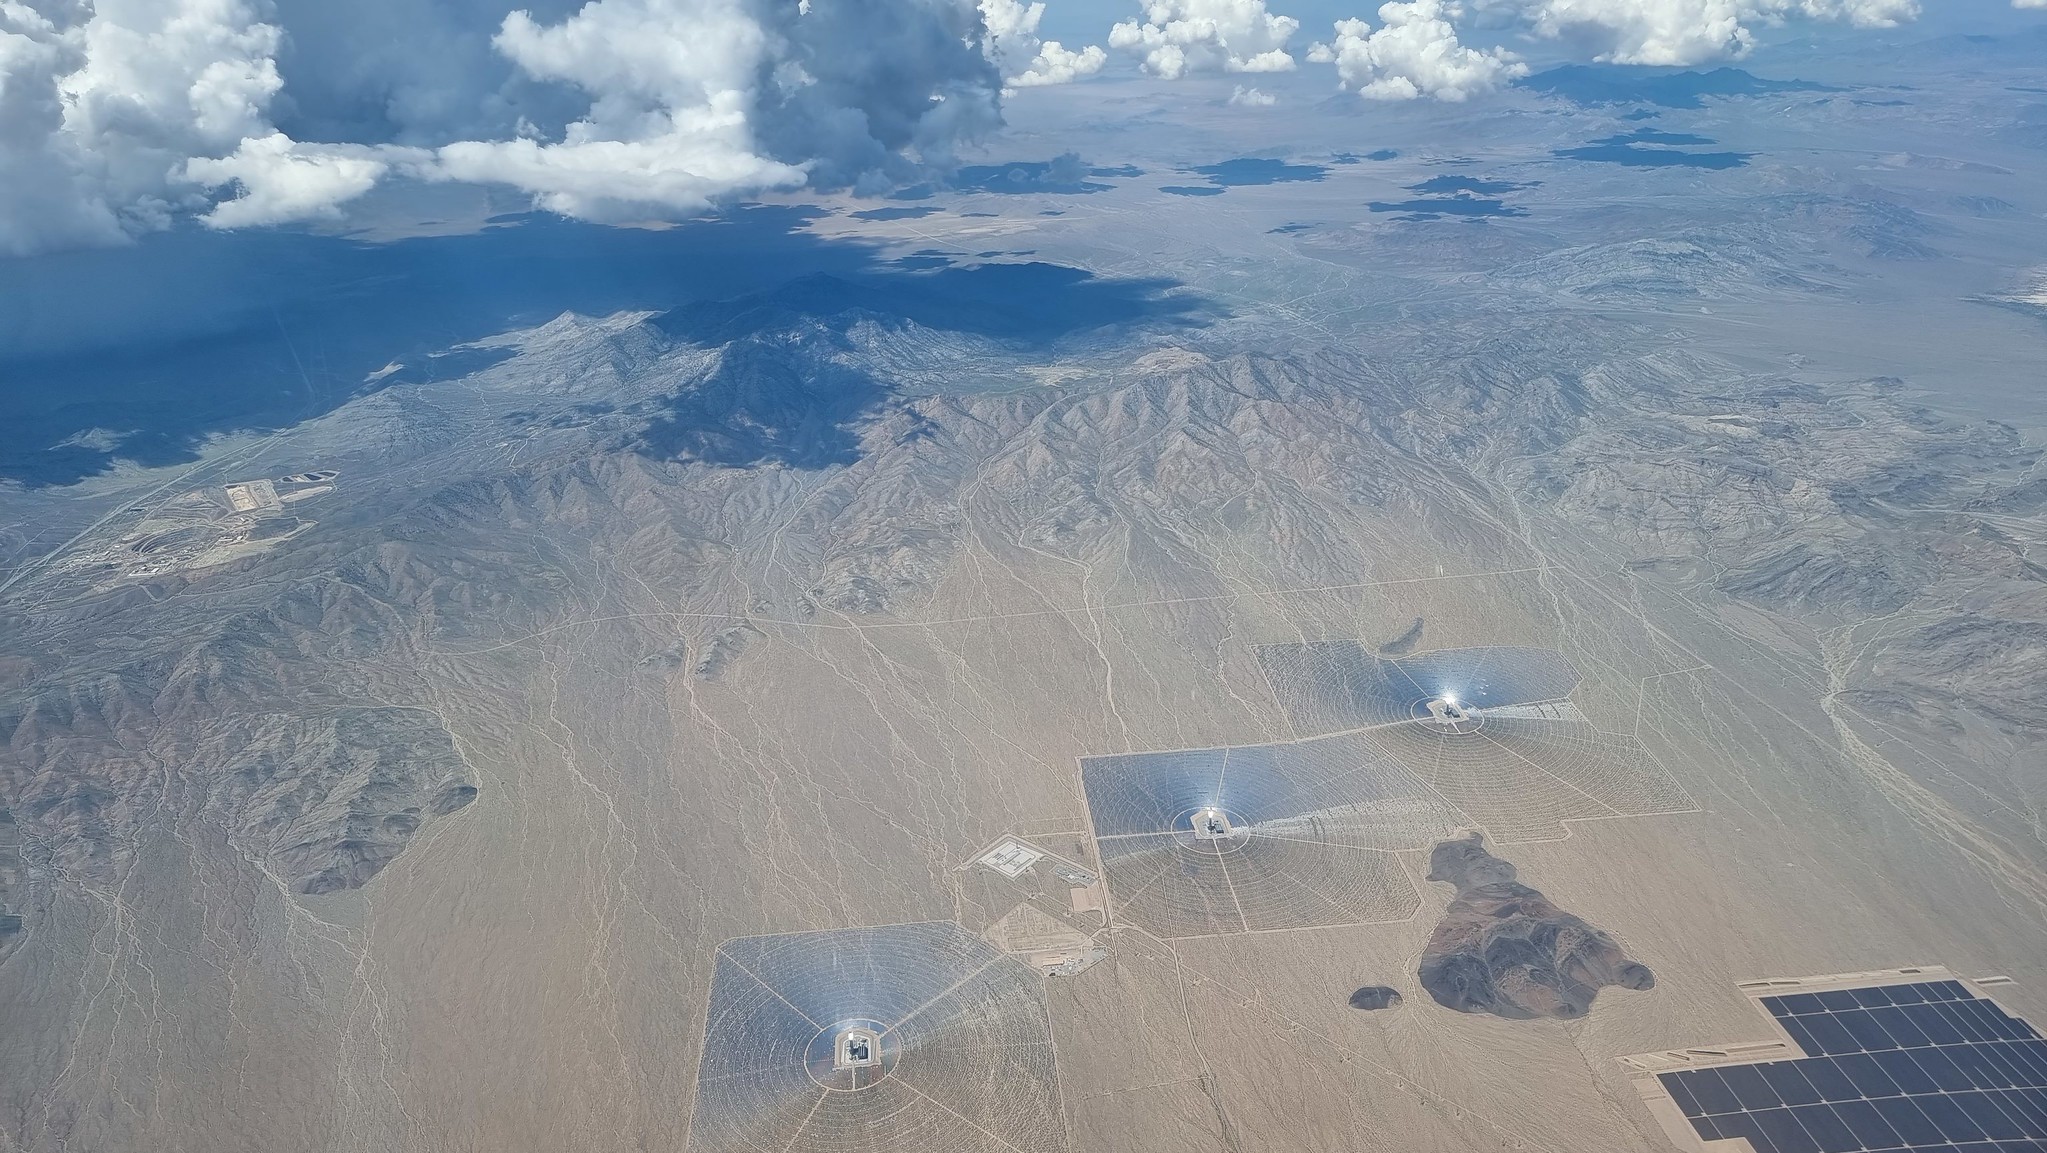 A great view of the Ivanpah Solar Power Facility after taking off from Las Vegas